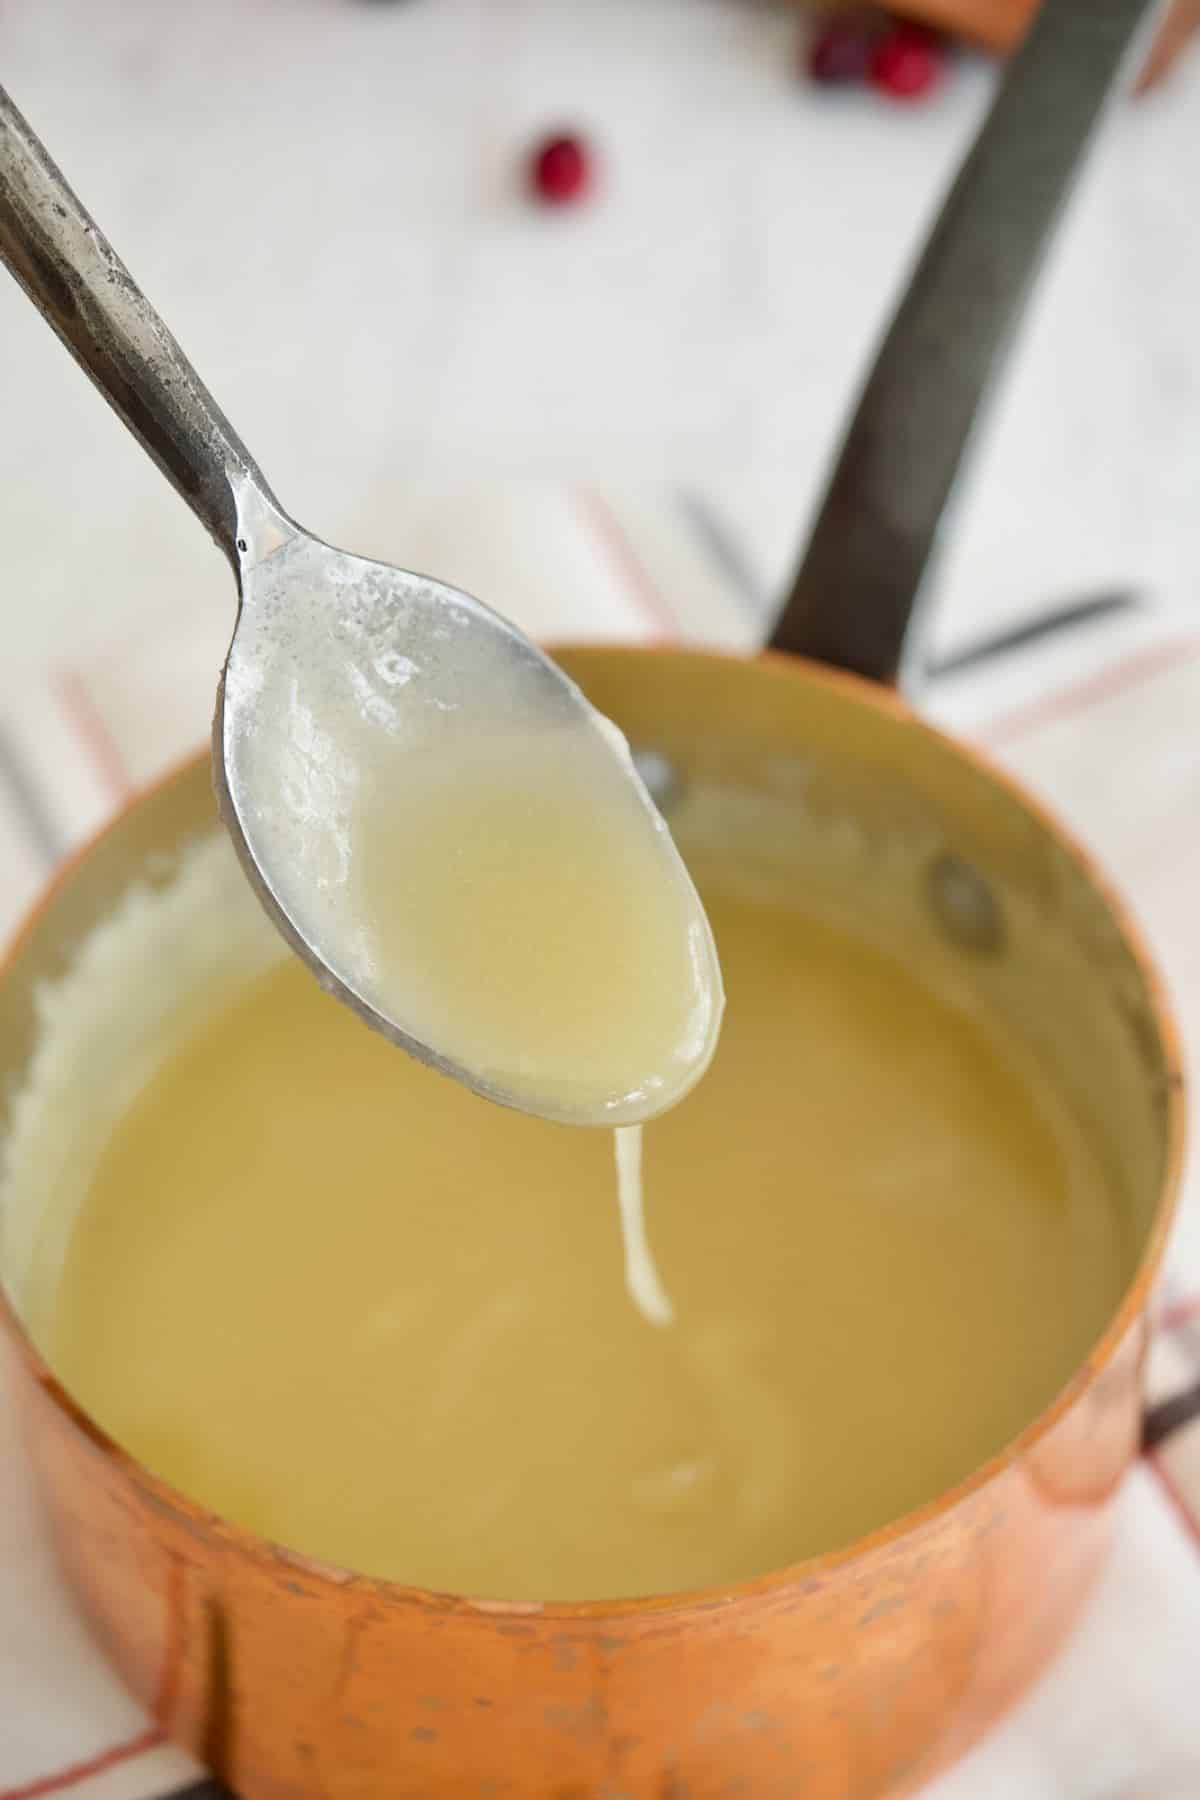 A spoon in pan filled with thick butter sauce.